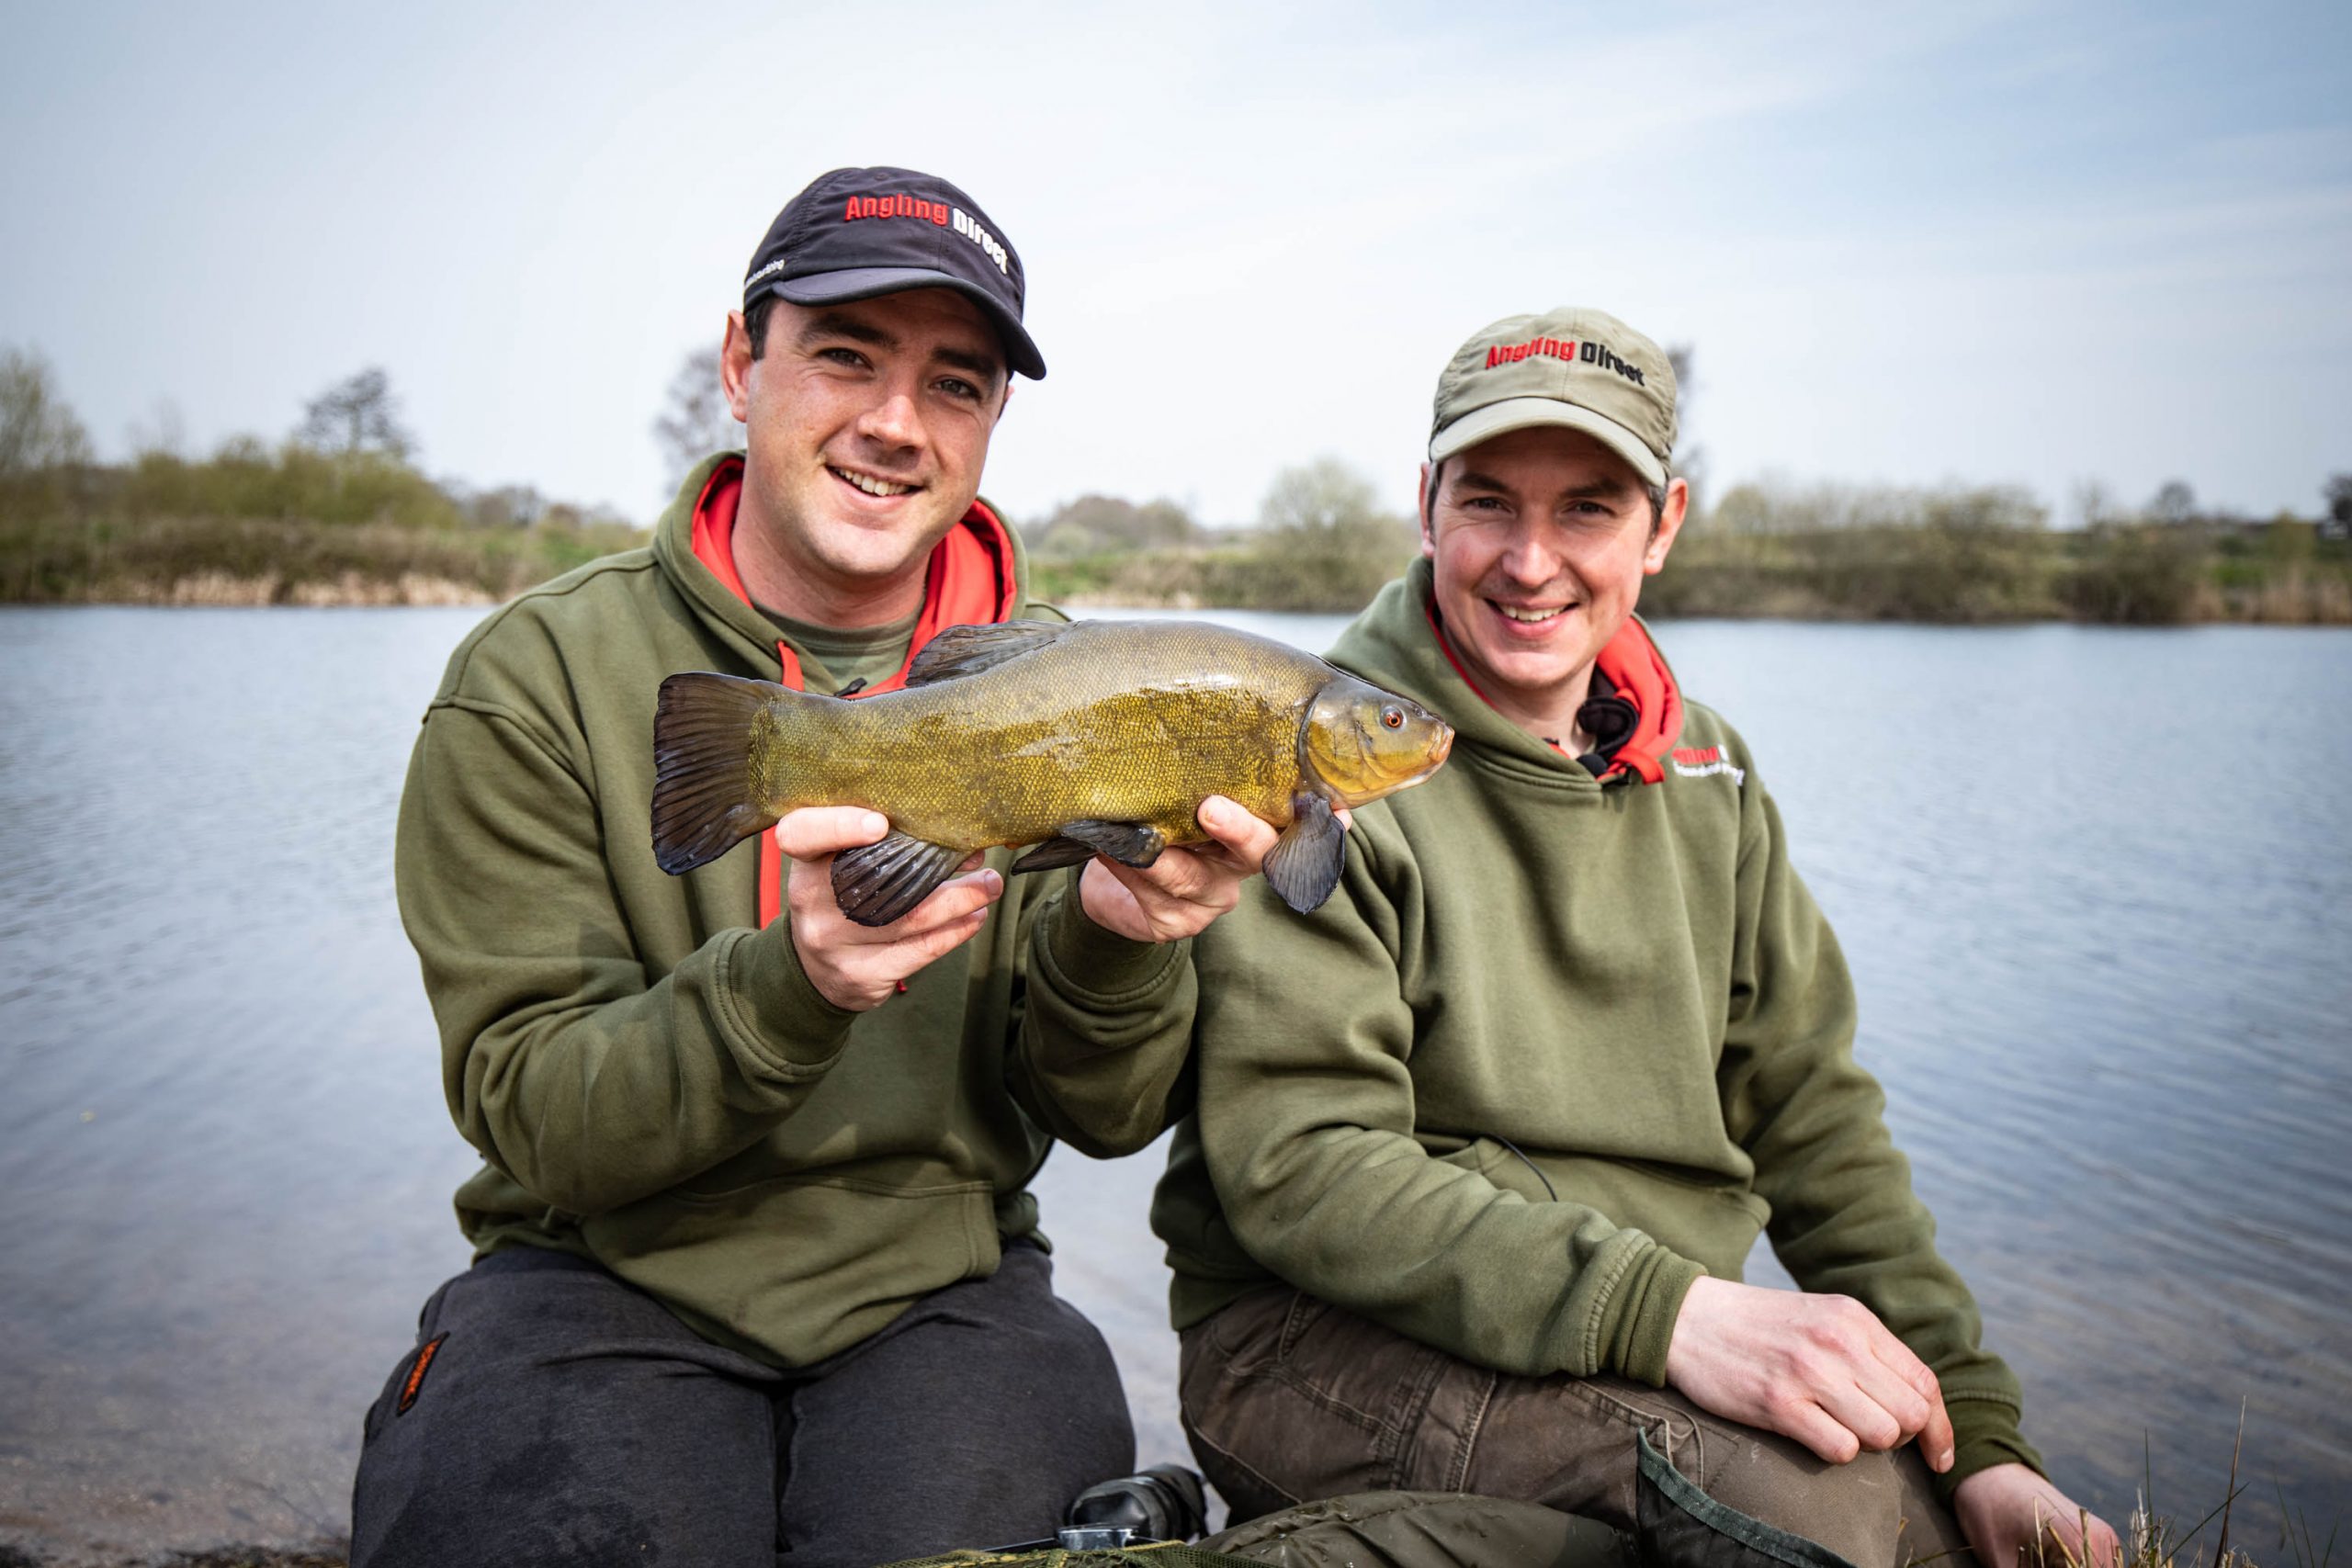 Get Fishing Team | AD - Angling Direct Team AD anglers